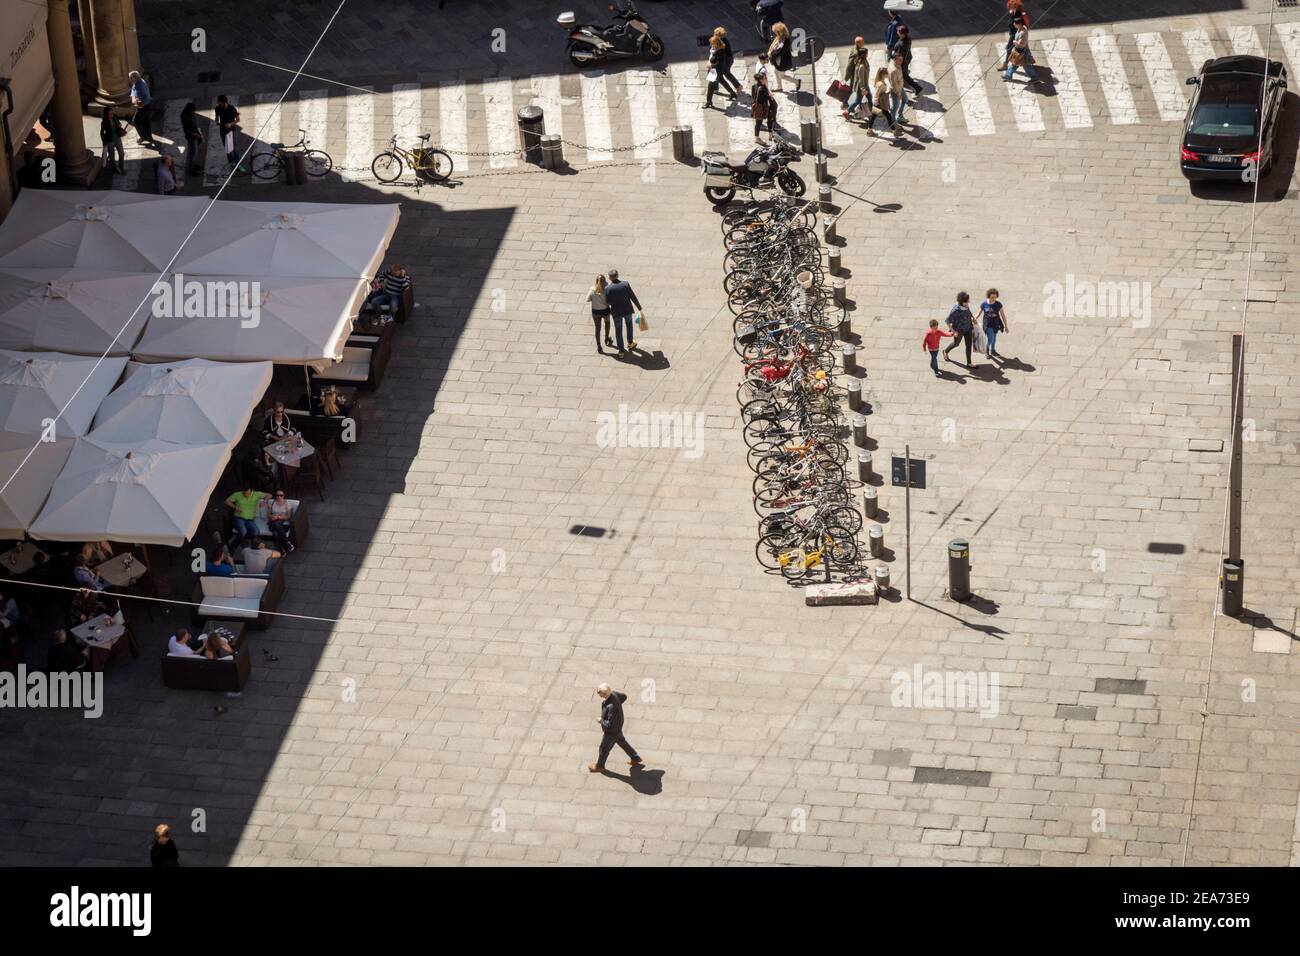 An aerial view of a square in the city of Bologna Italy showing people and a cycle rack Stock Photo